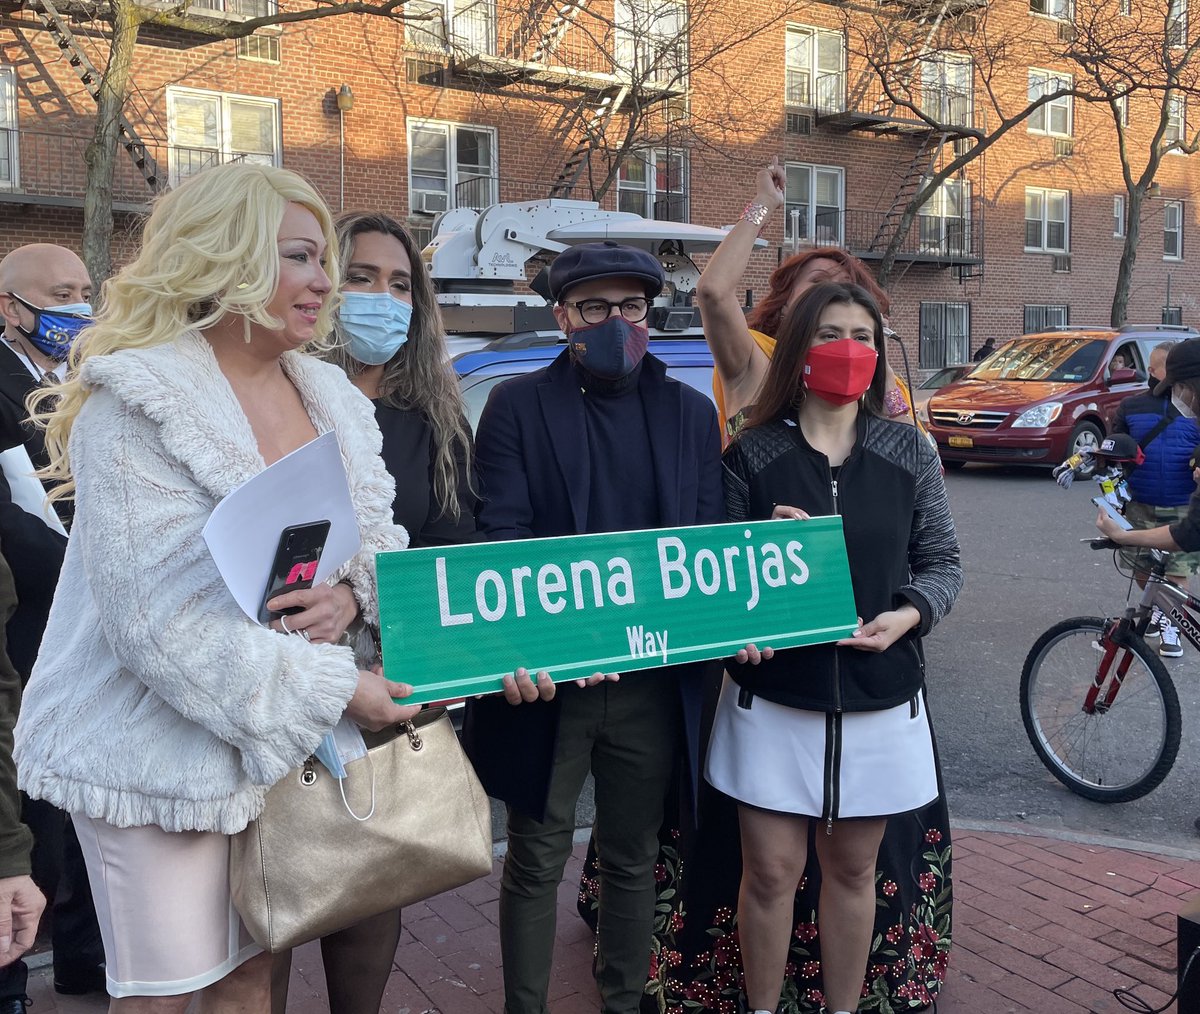 Lorena Borjas fearlessly lived her truth & fought tirelessly for her pájaras, her trans community—inspiring so many along the way. It’s because of her activism we passed the #WalkingWhileTrans ban & are even talking about decriminalizing #SexWork.